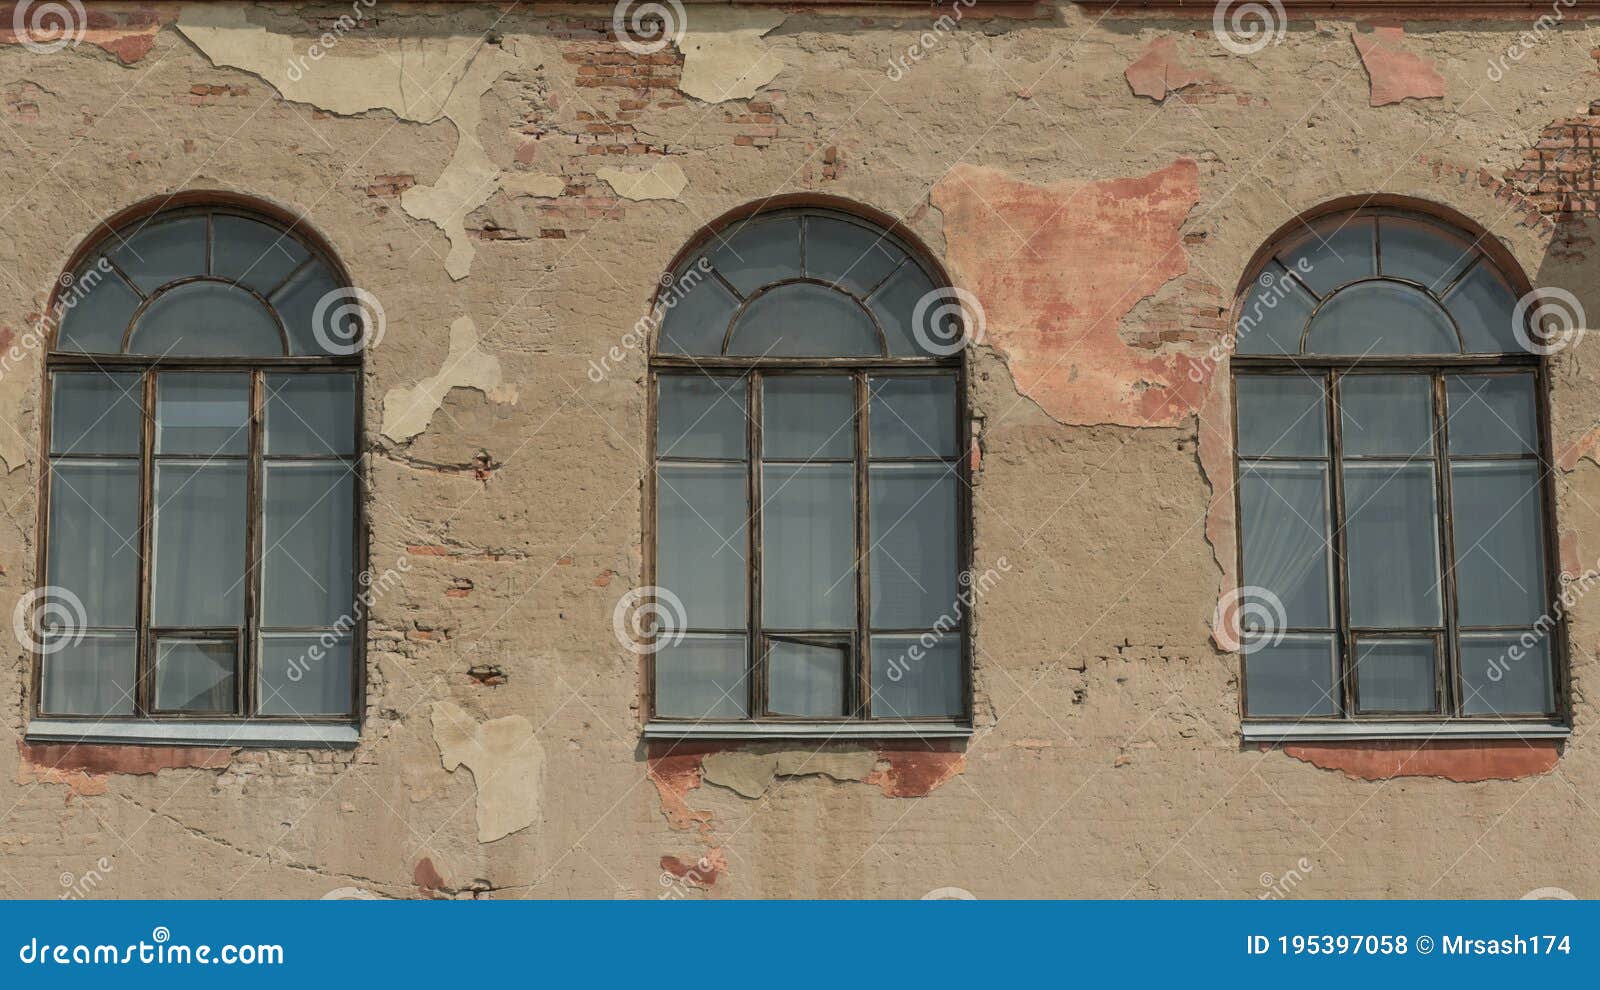 three old arched windows of building